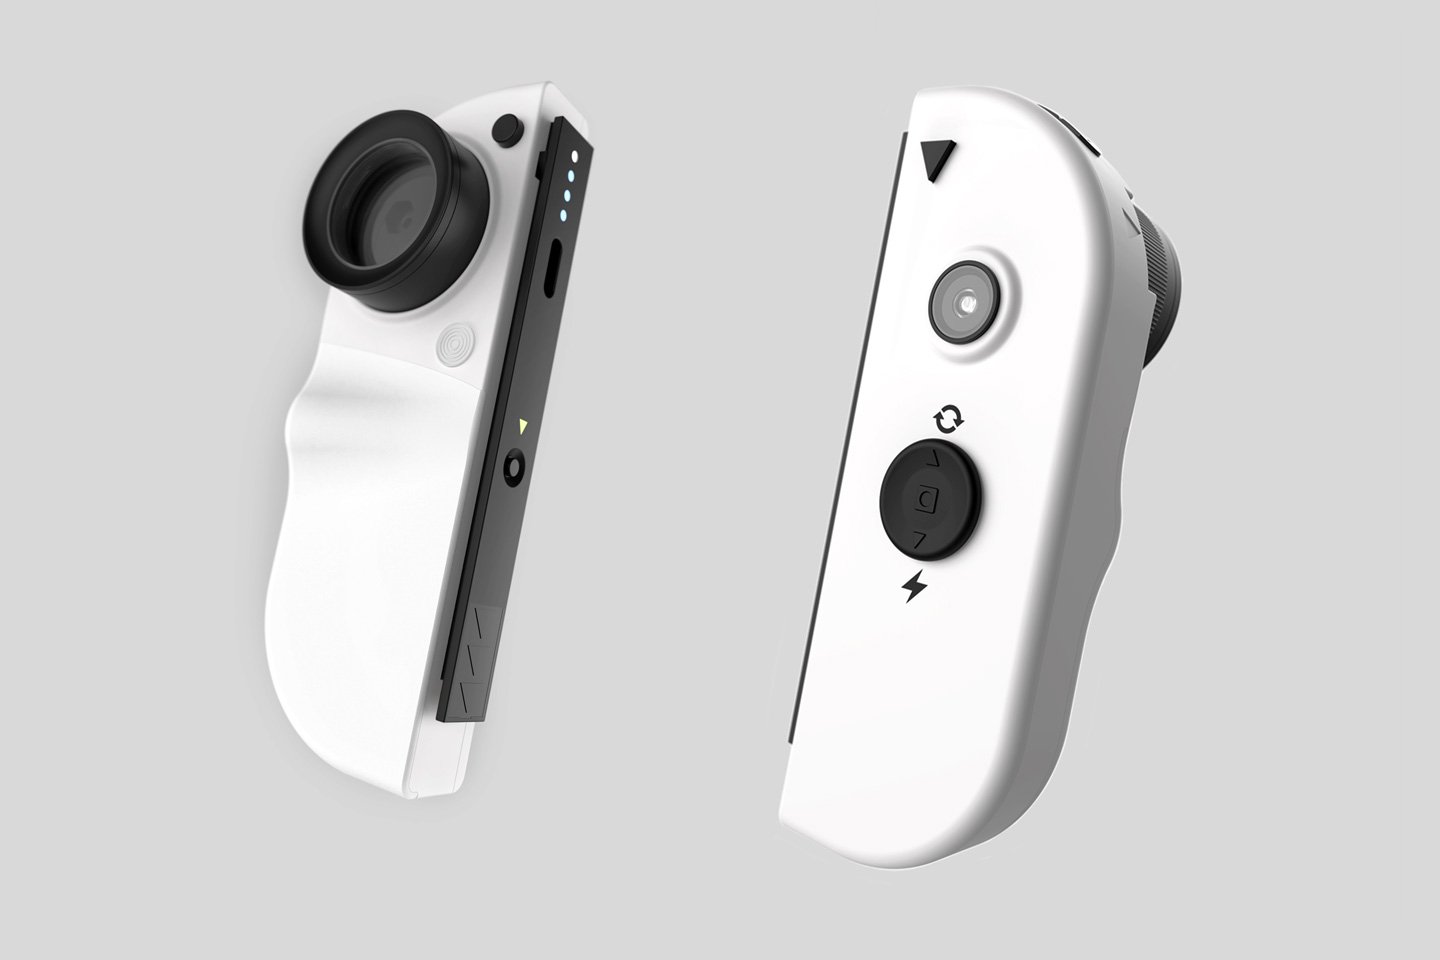 New Nintendo Switch Joy-Con has two cameras for immersive AR